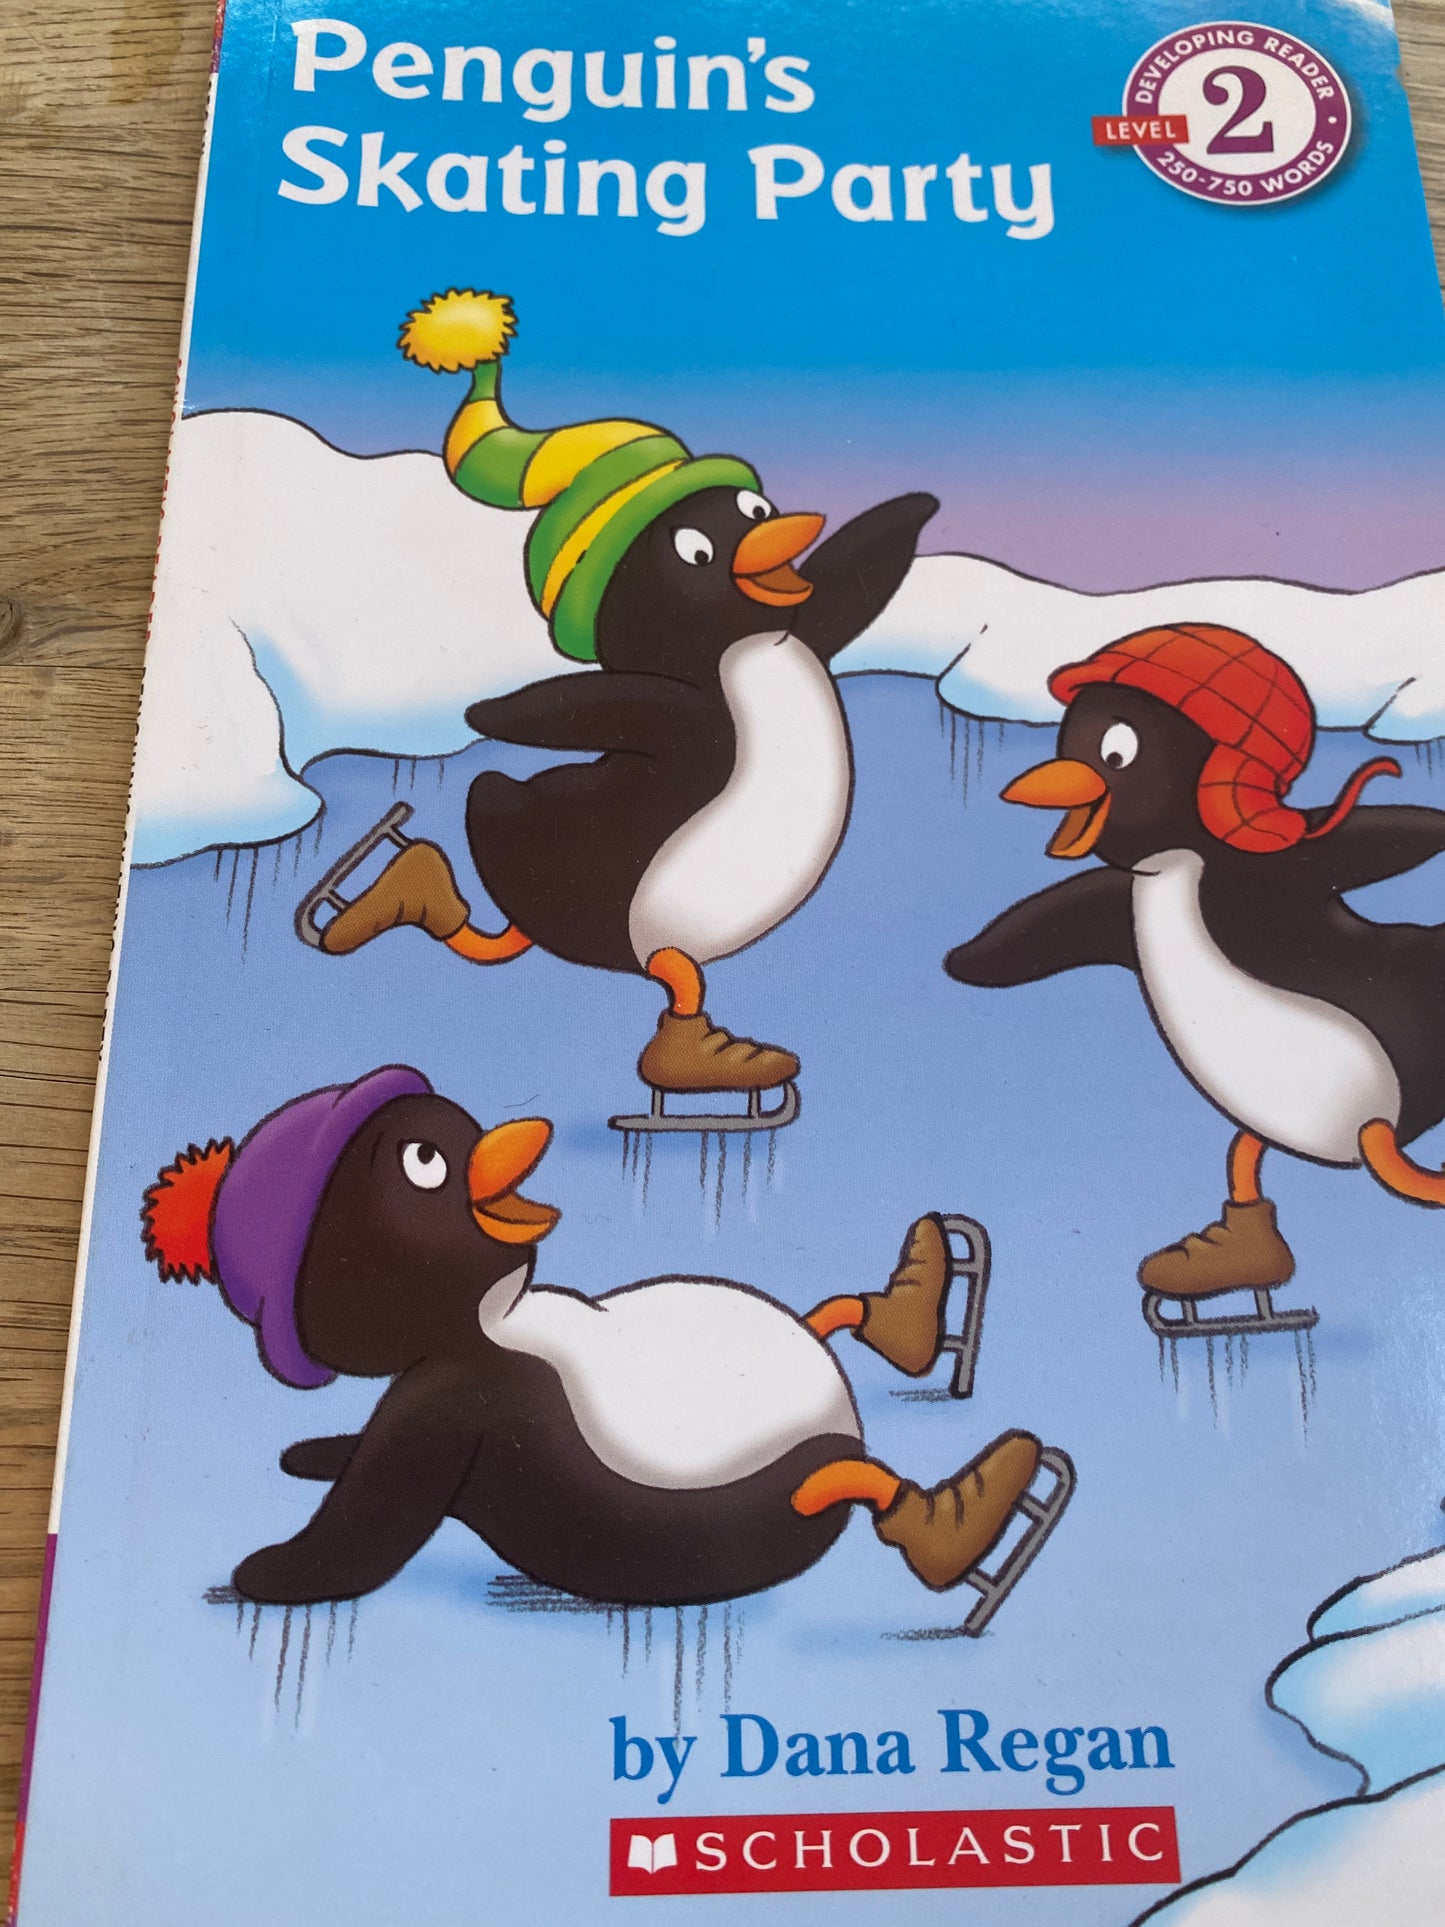 Penguin's skating party